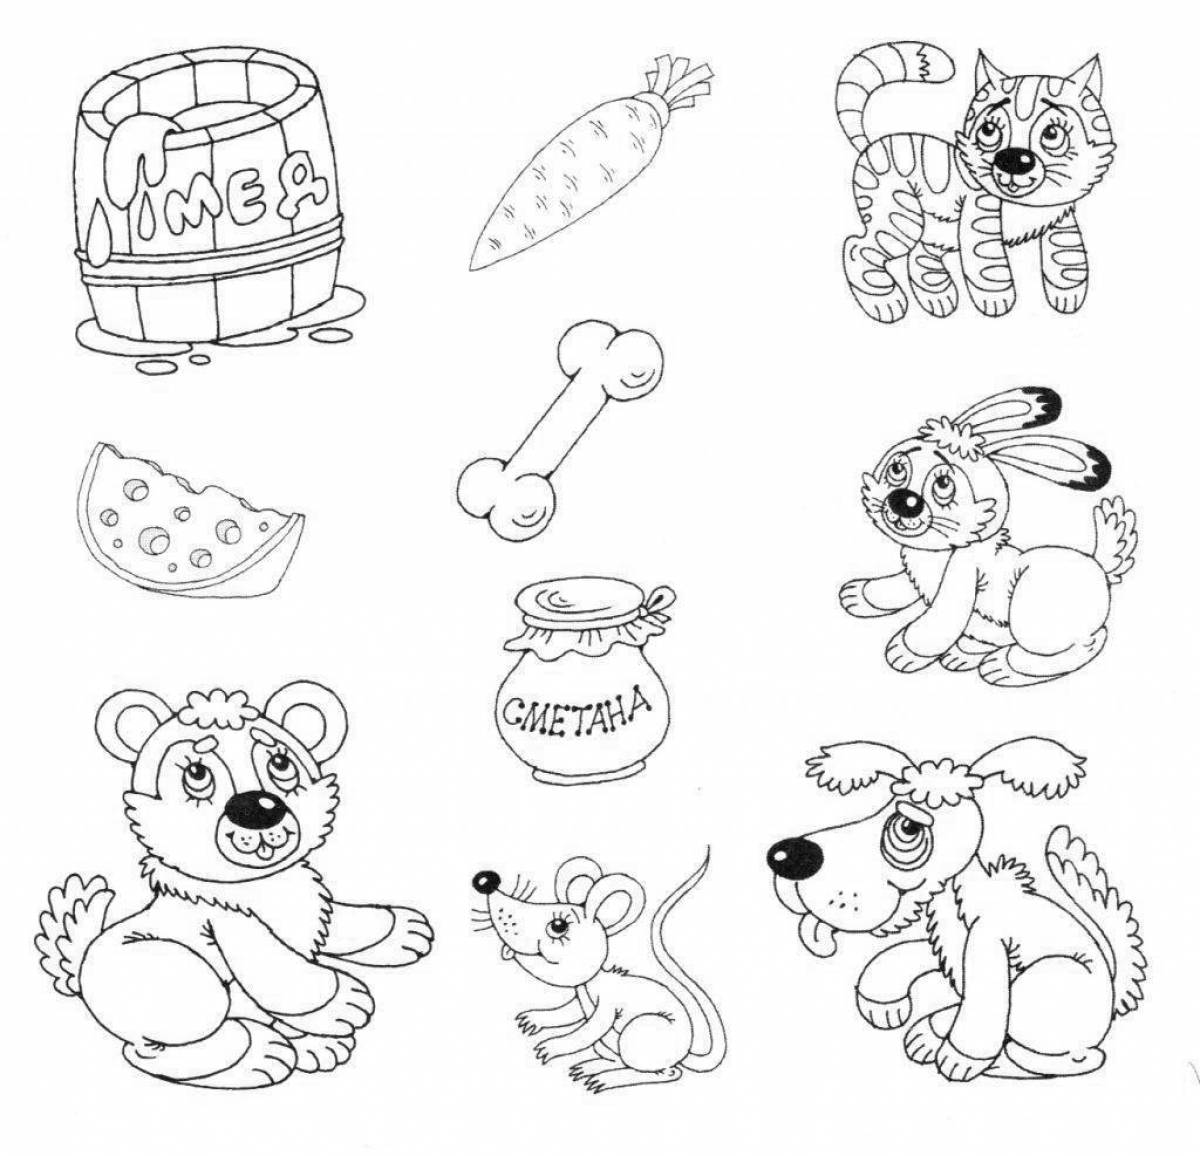 Great coloring book for 4-5 year olds